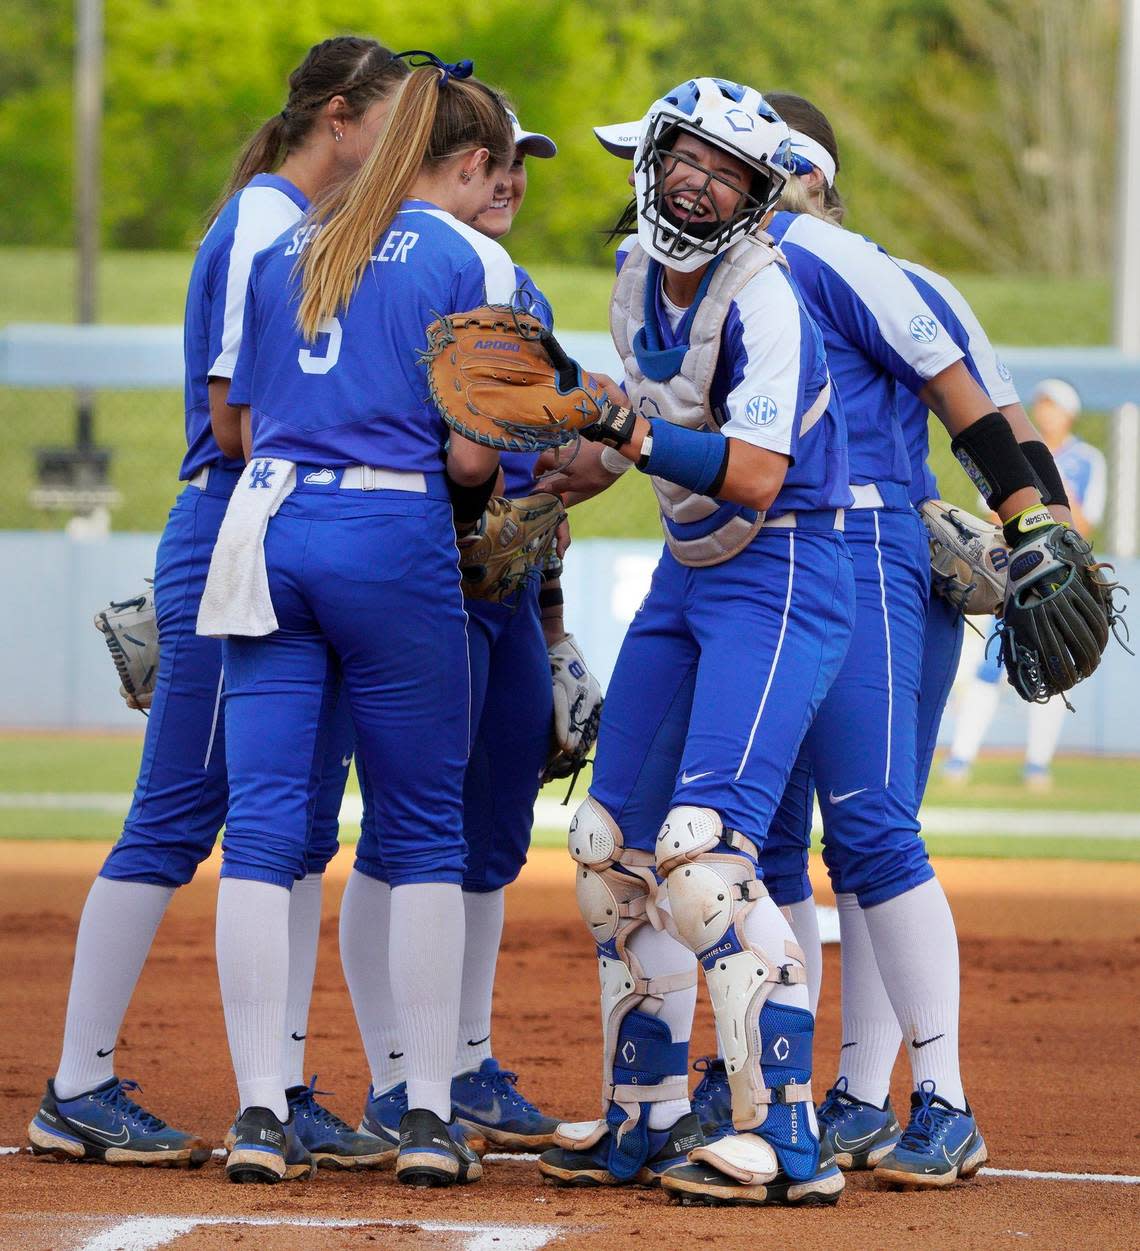 Catcher Kayla Kowalik’s ability to connect with the UK pitching staff could be a key to the Wildcats’ success this season.